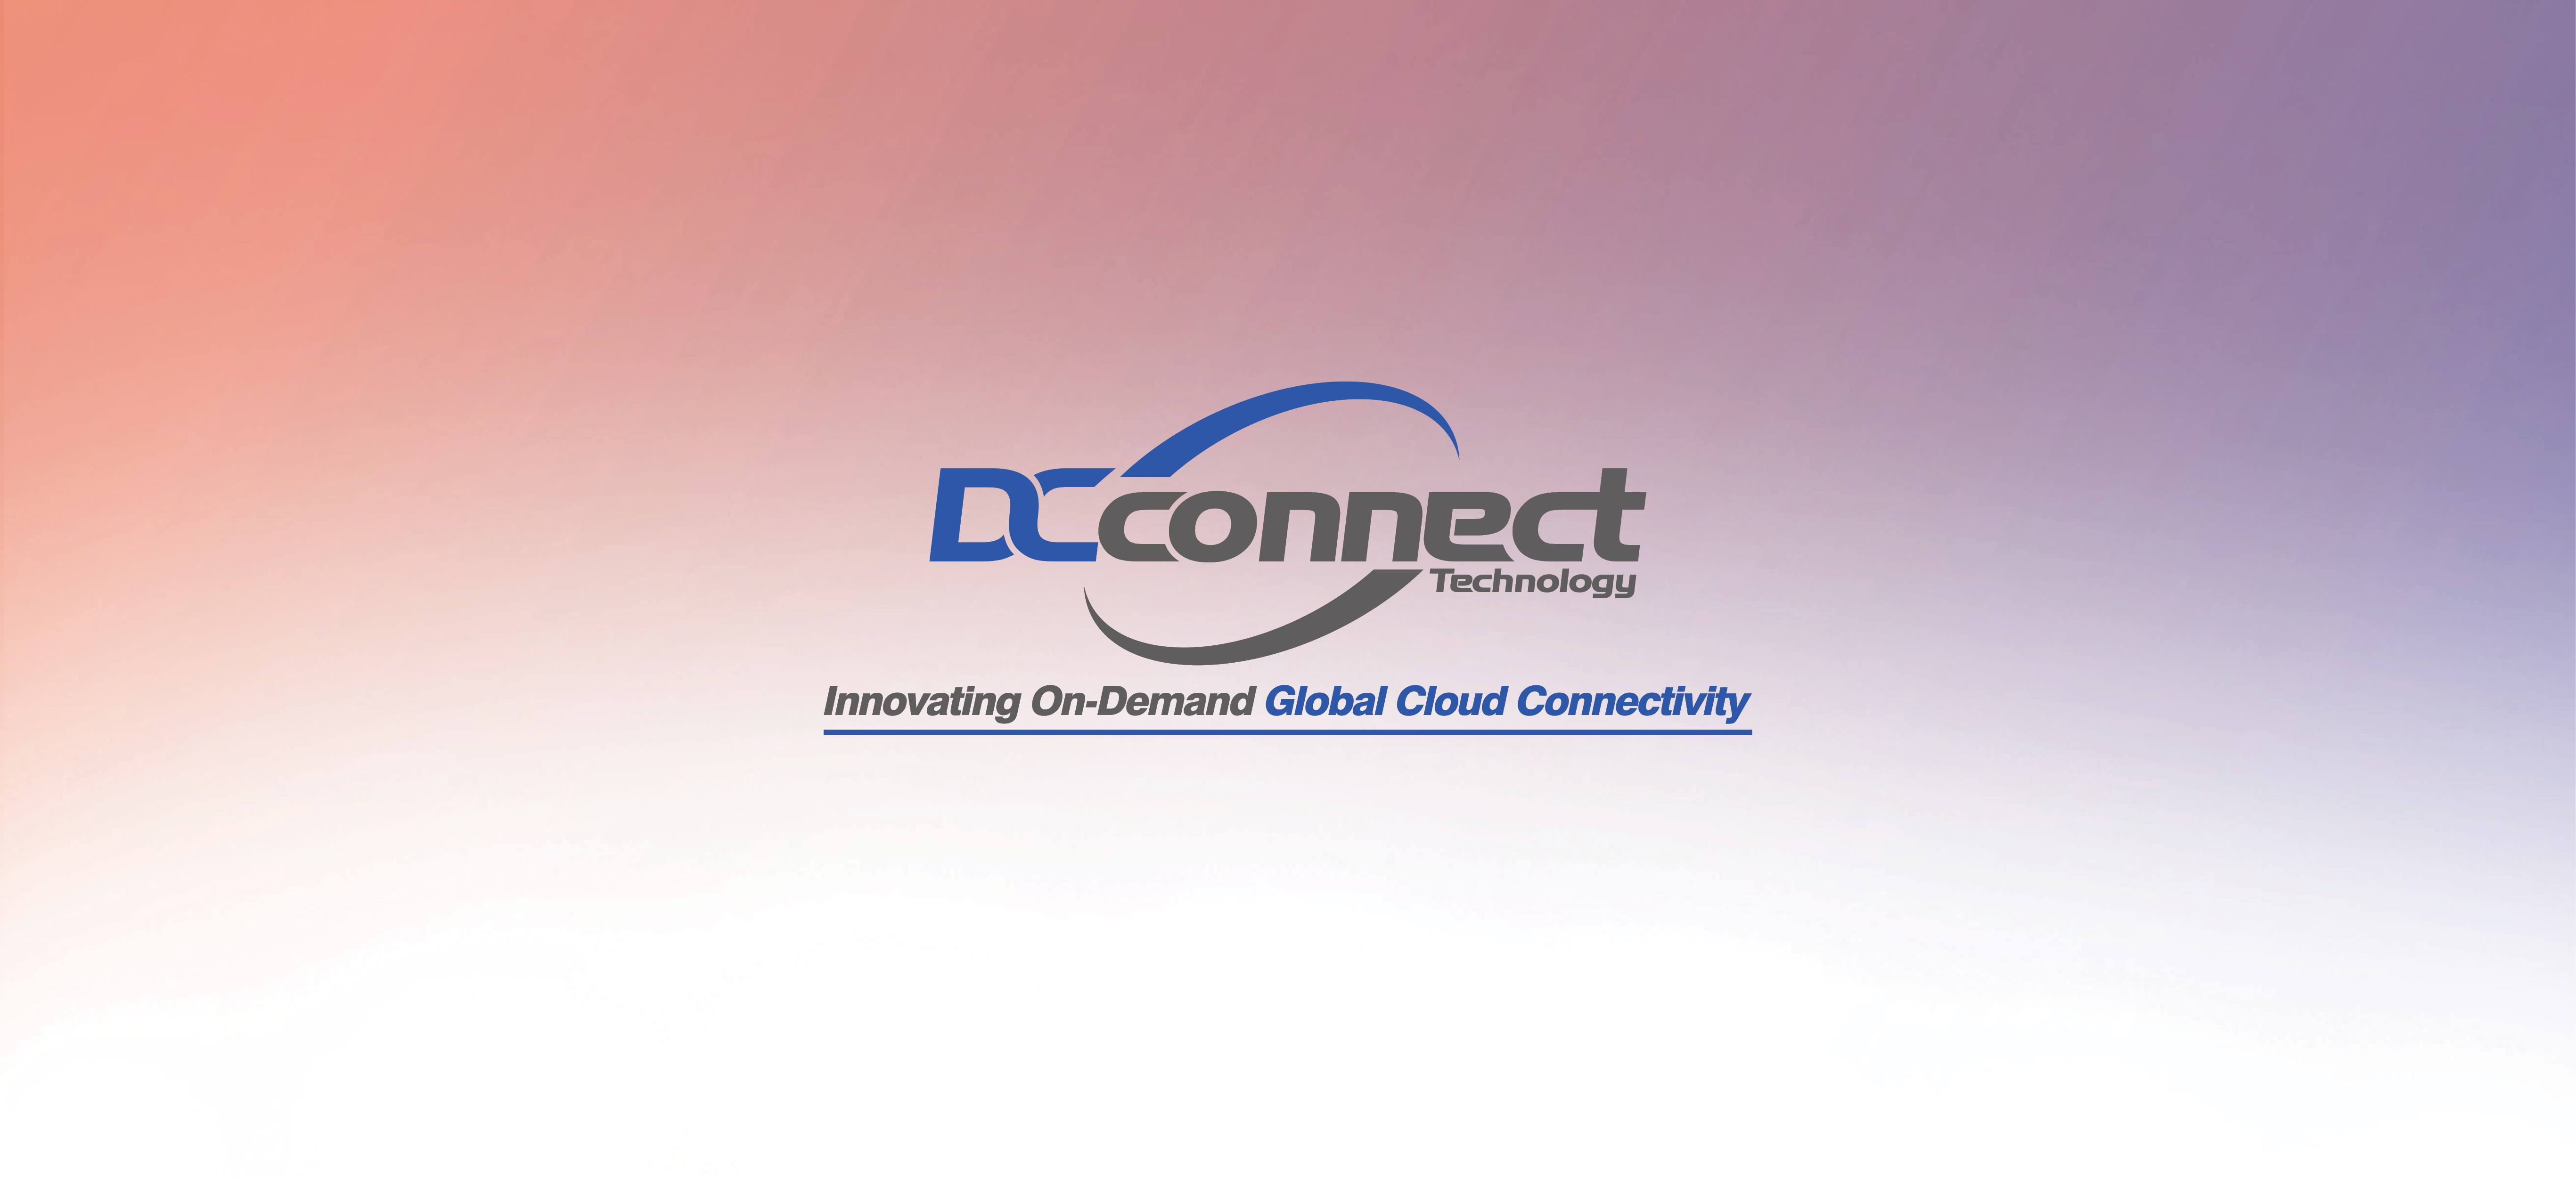 DCConnect and Epsilon Jointly Host the Global Fabric Shanghai Workshop to Accelerate SDN and AI Innovation in China